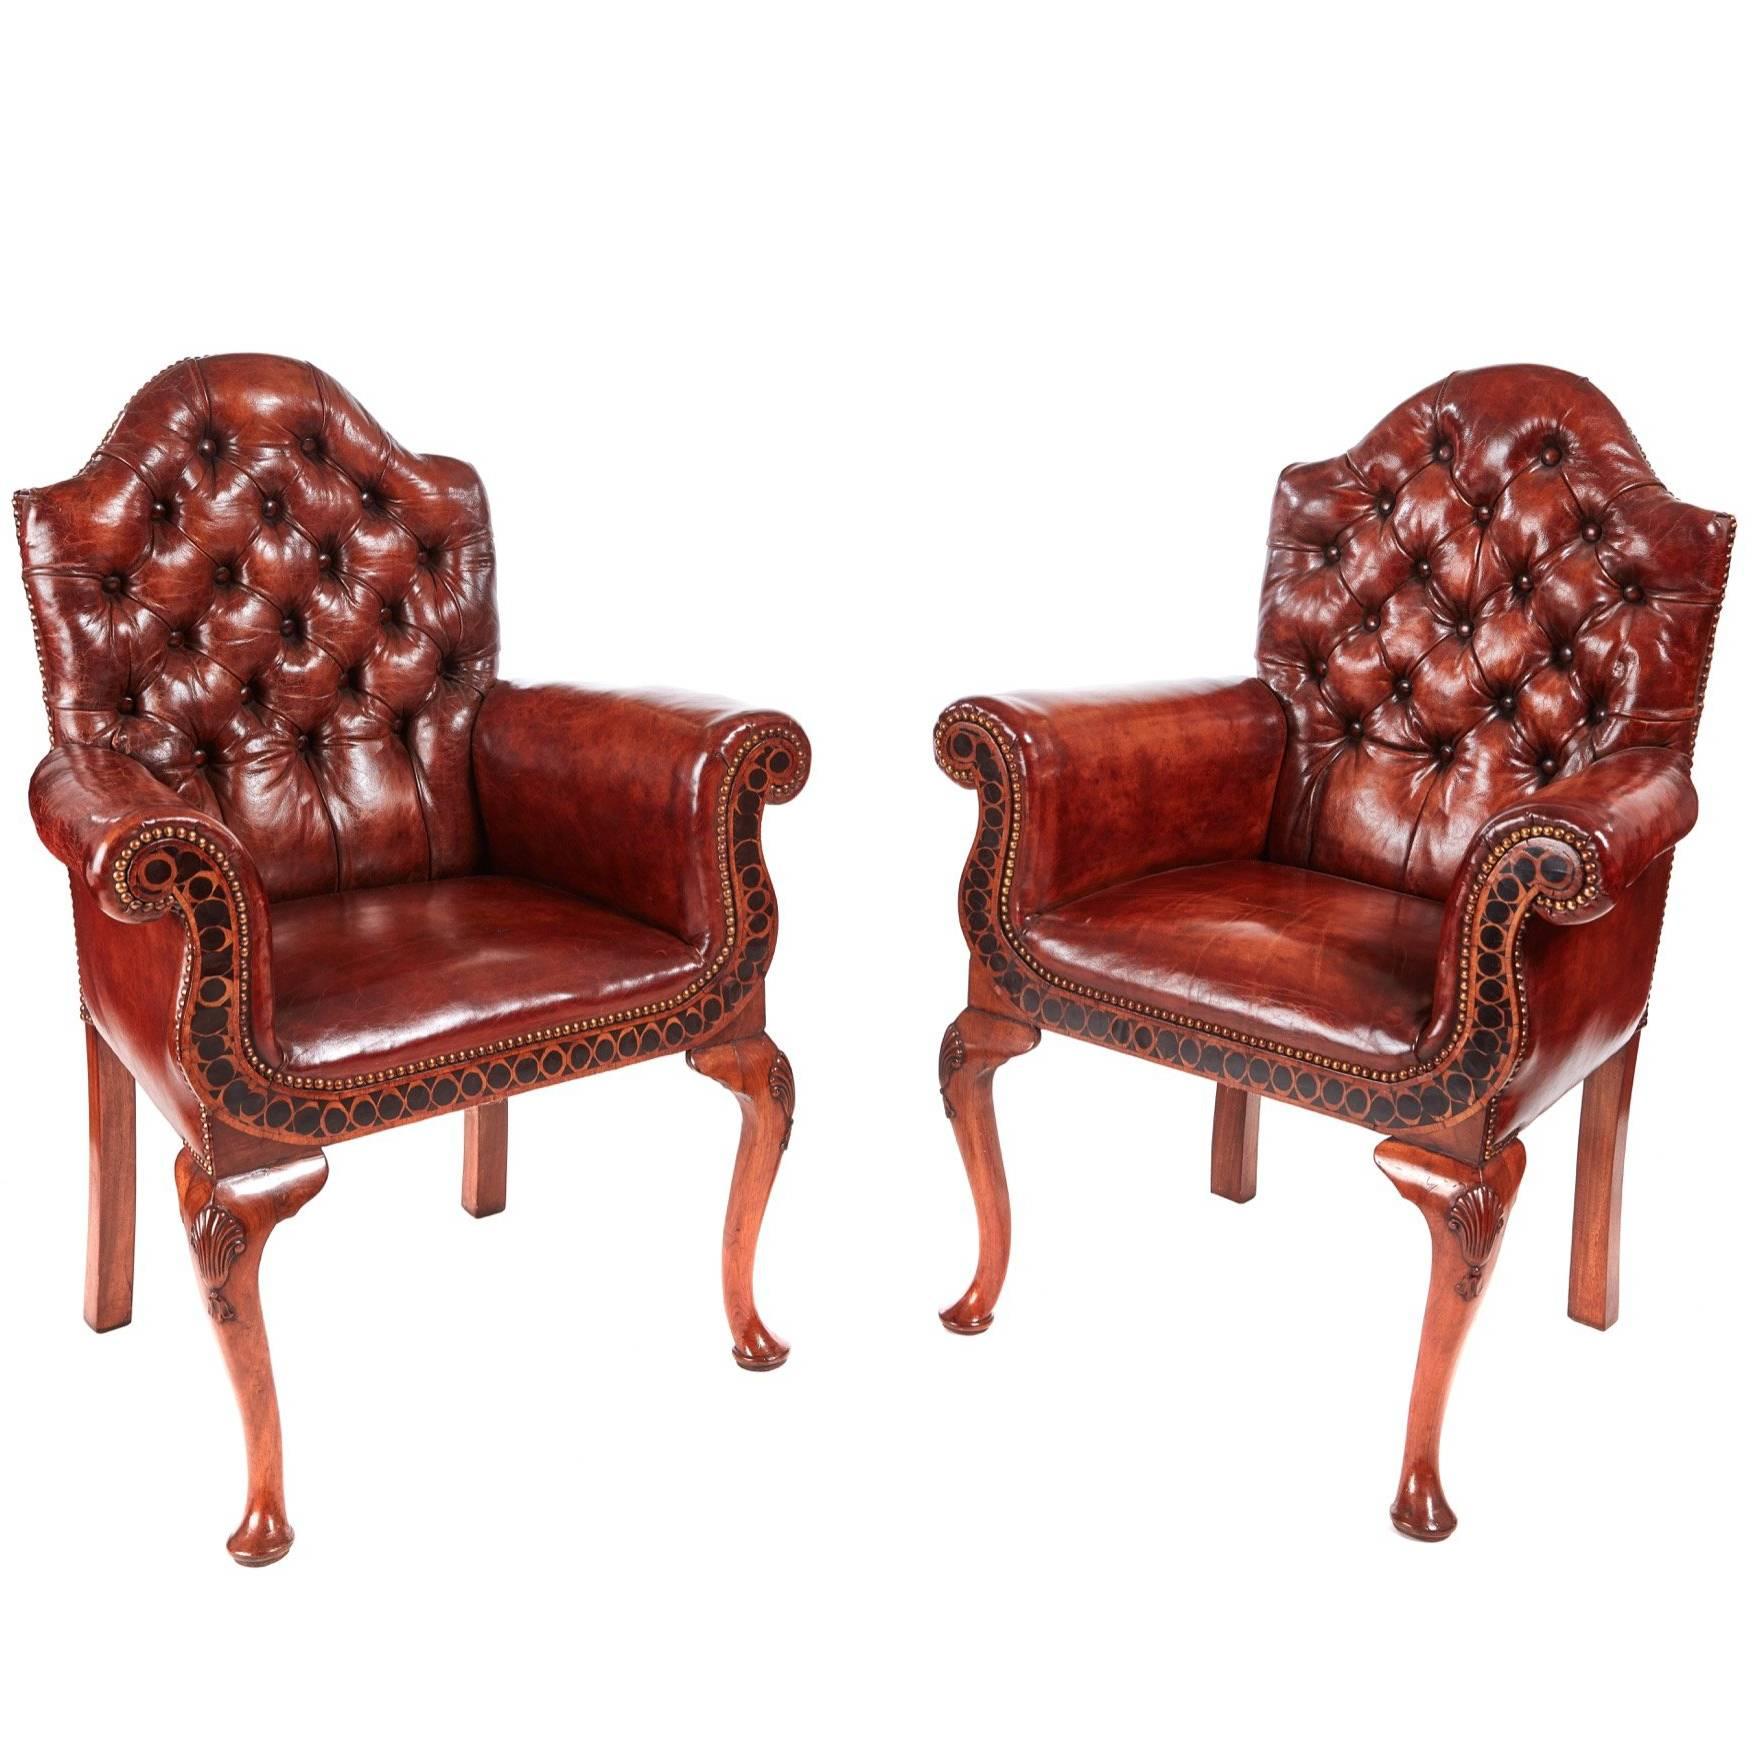 Outstanding Quality Pair of Antique Leather Buttoned Back Library Chairs